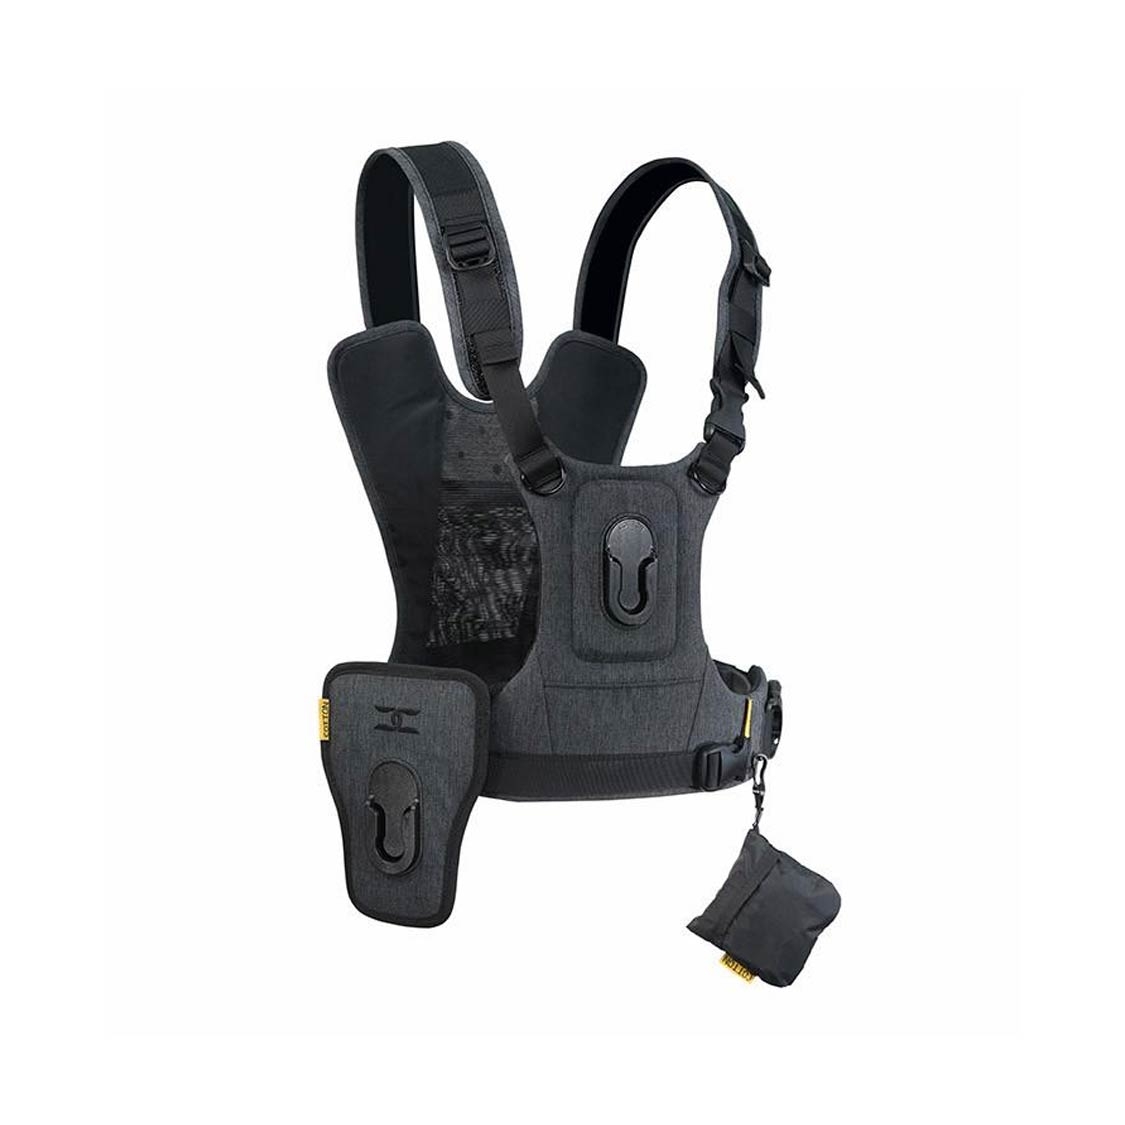 Cotton Carrier G3 Harness 2 (grey)